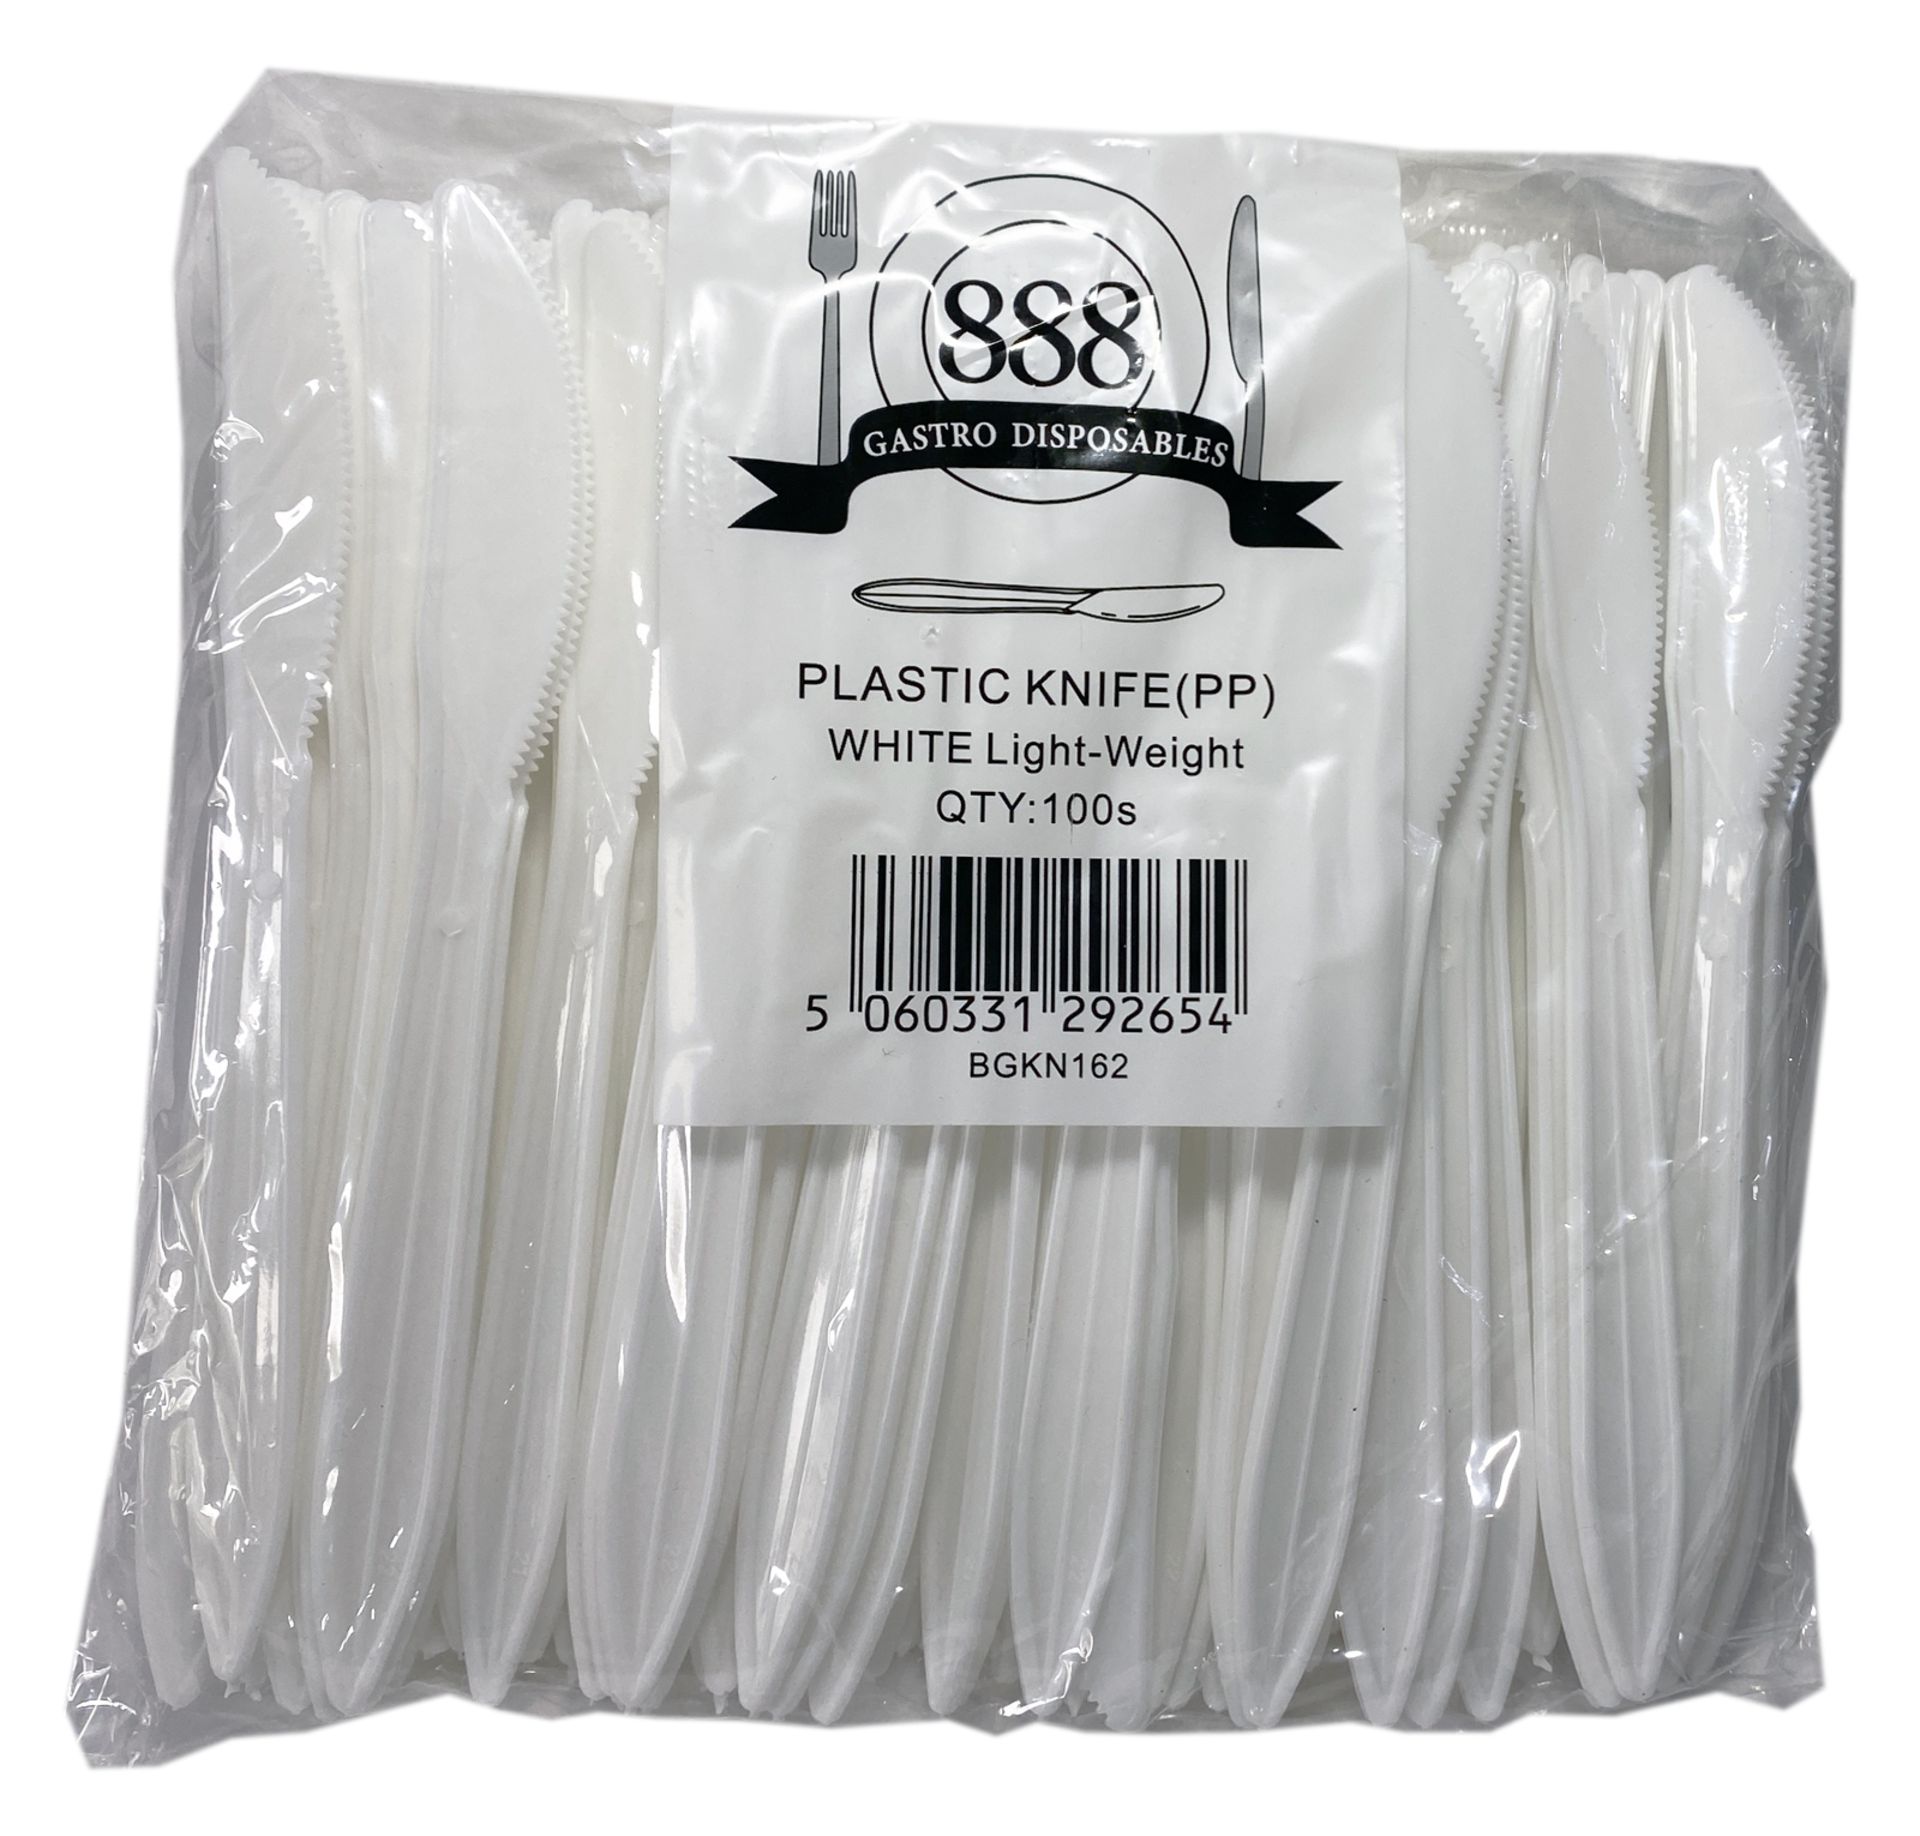 1 x Box of 1000 Plastic Knives by 888 Gastro Disposables - Image 3 of 3